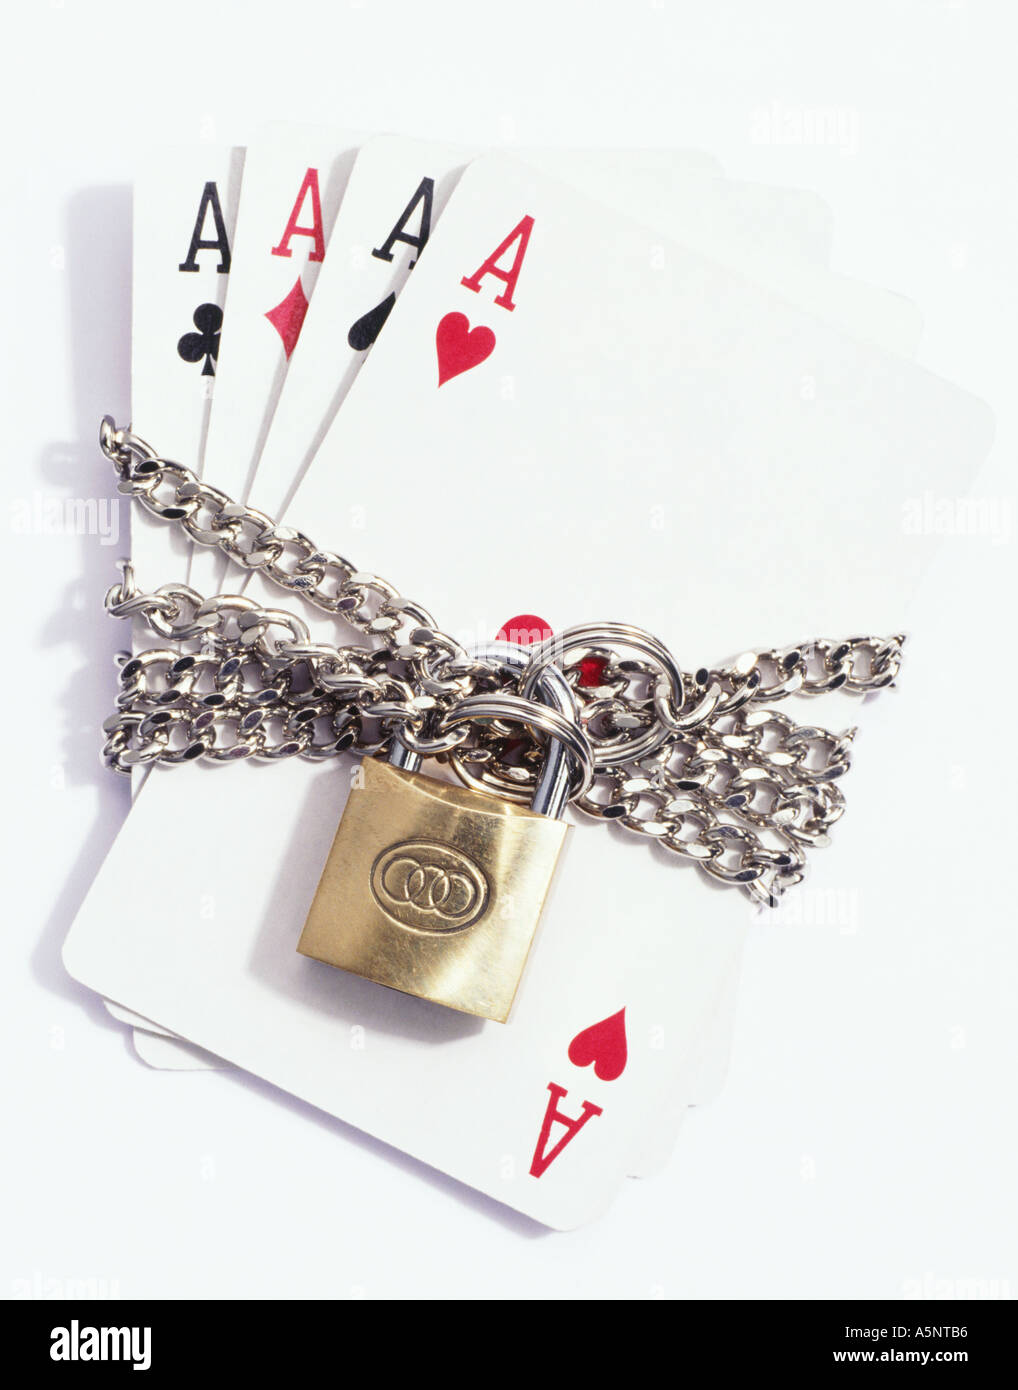 Four ace playing cards padlocked in chains Stock Photo